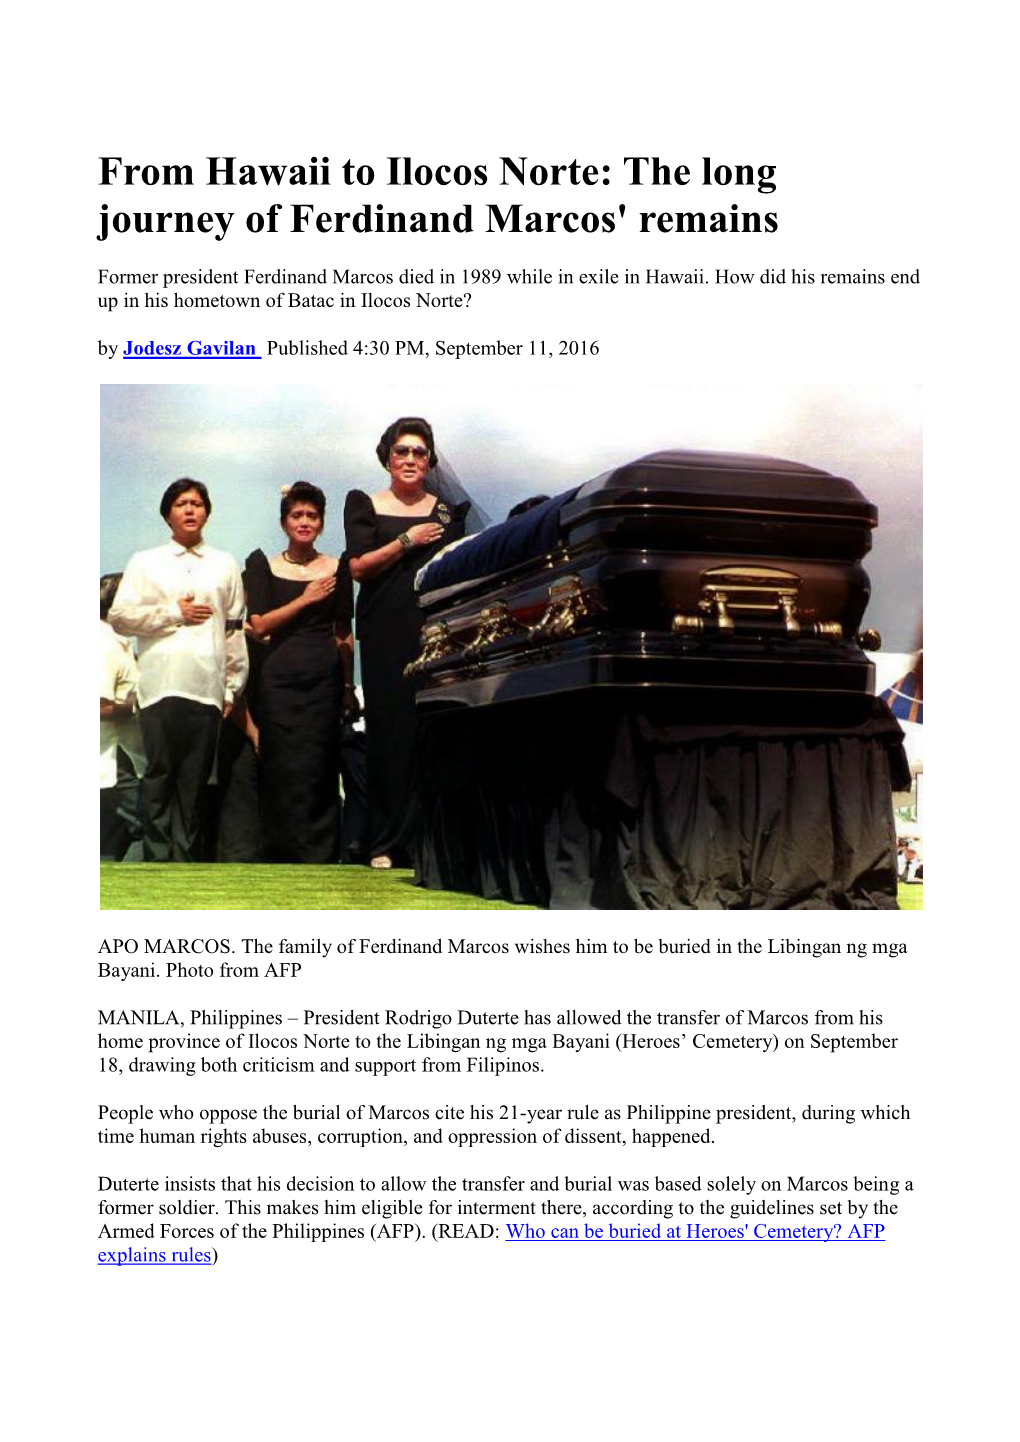 From Hawaii to Ilocos Norte: the Long Journey of Ferdinand Marcos' Remains